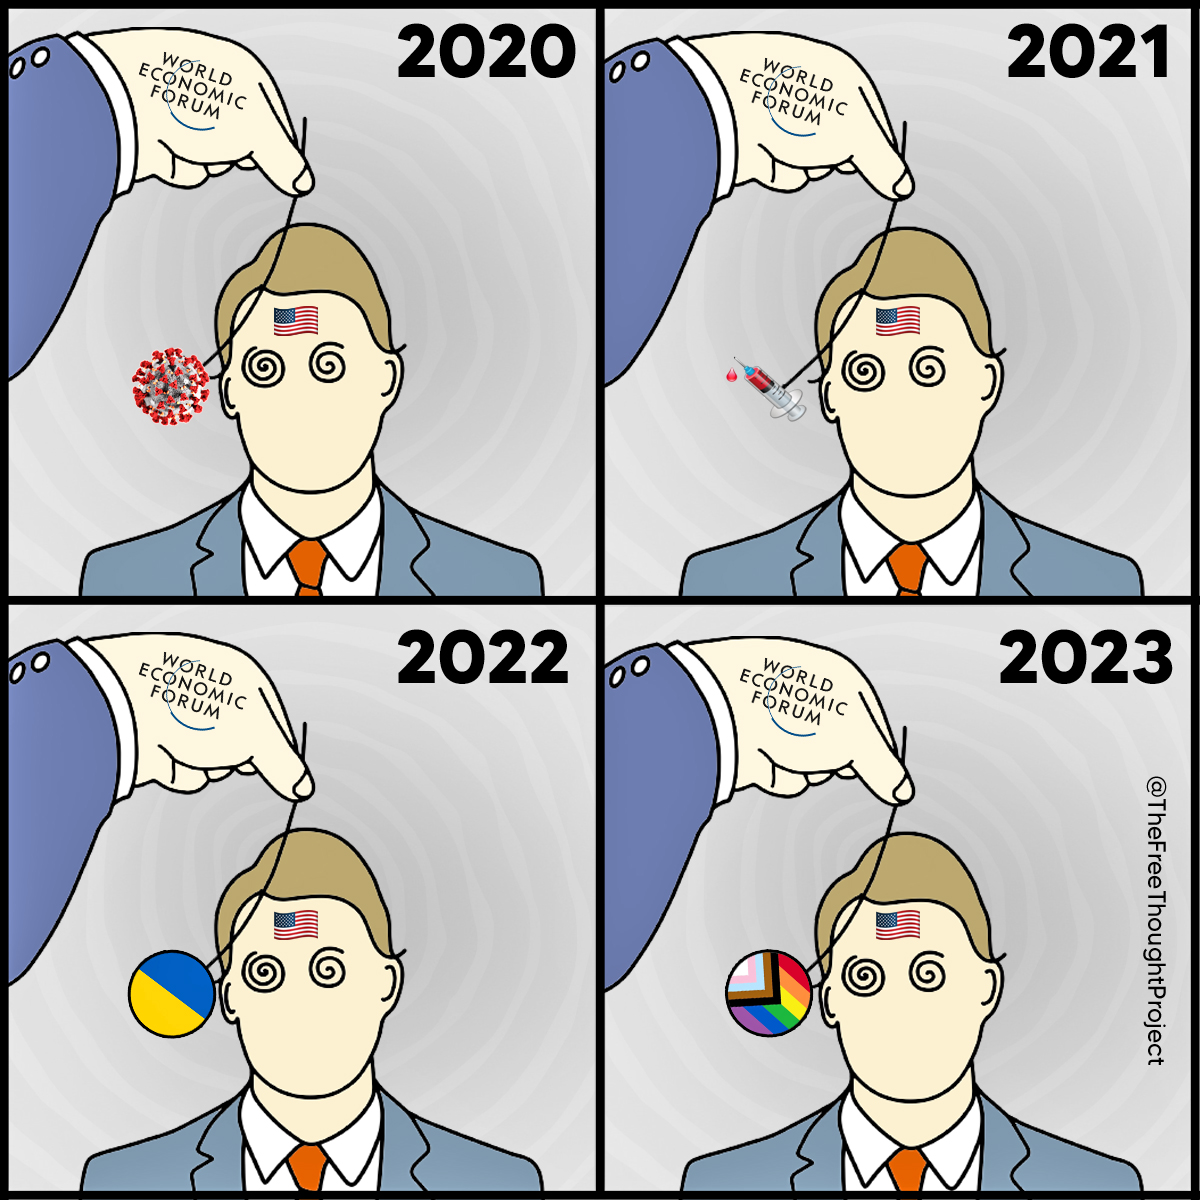 Another year, another psyop. What's next for 2024?

#TheFreeThoughtProject #TFTP